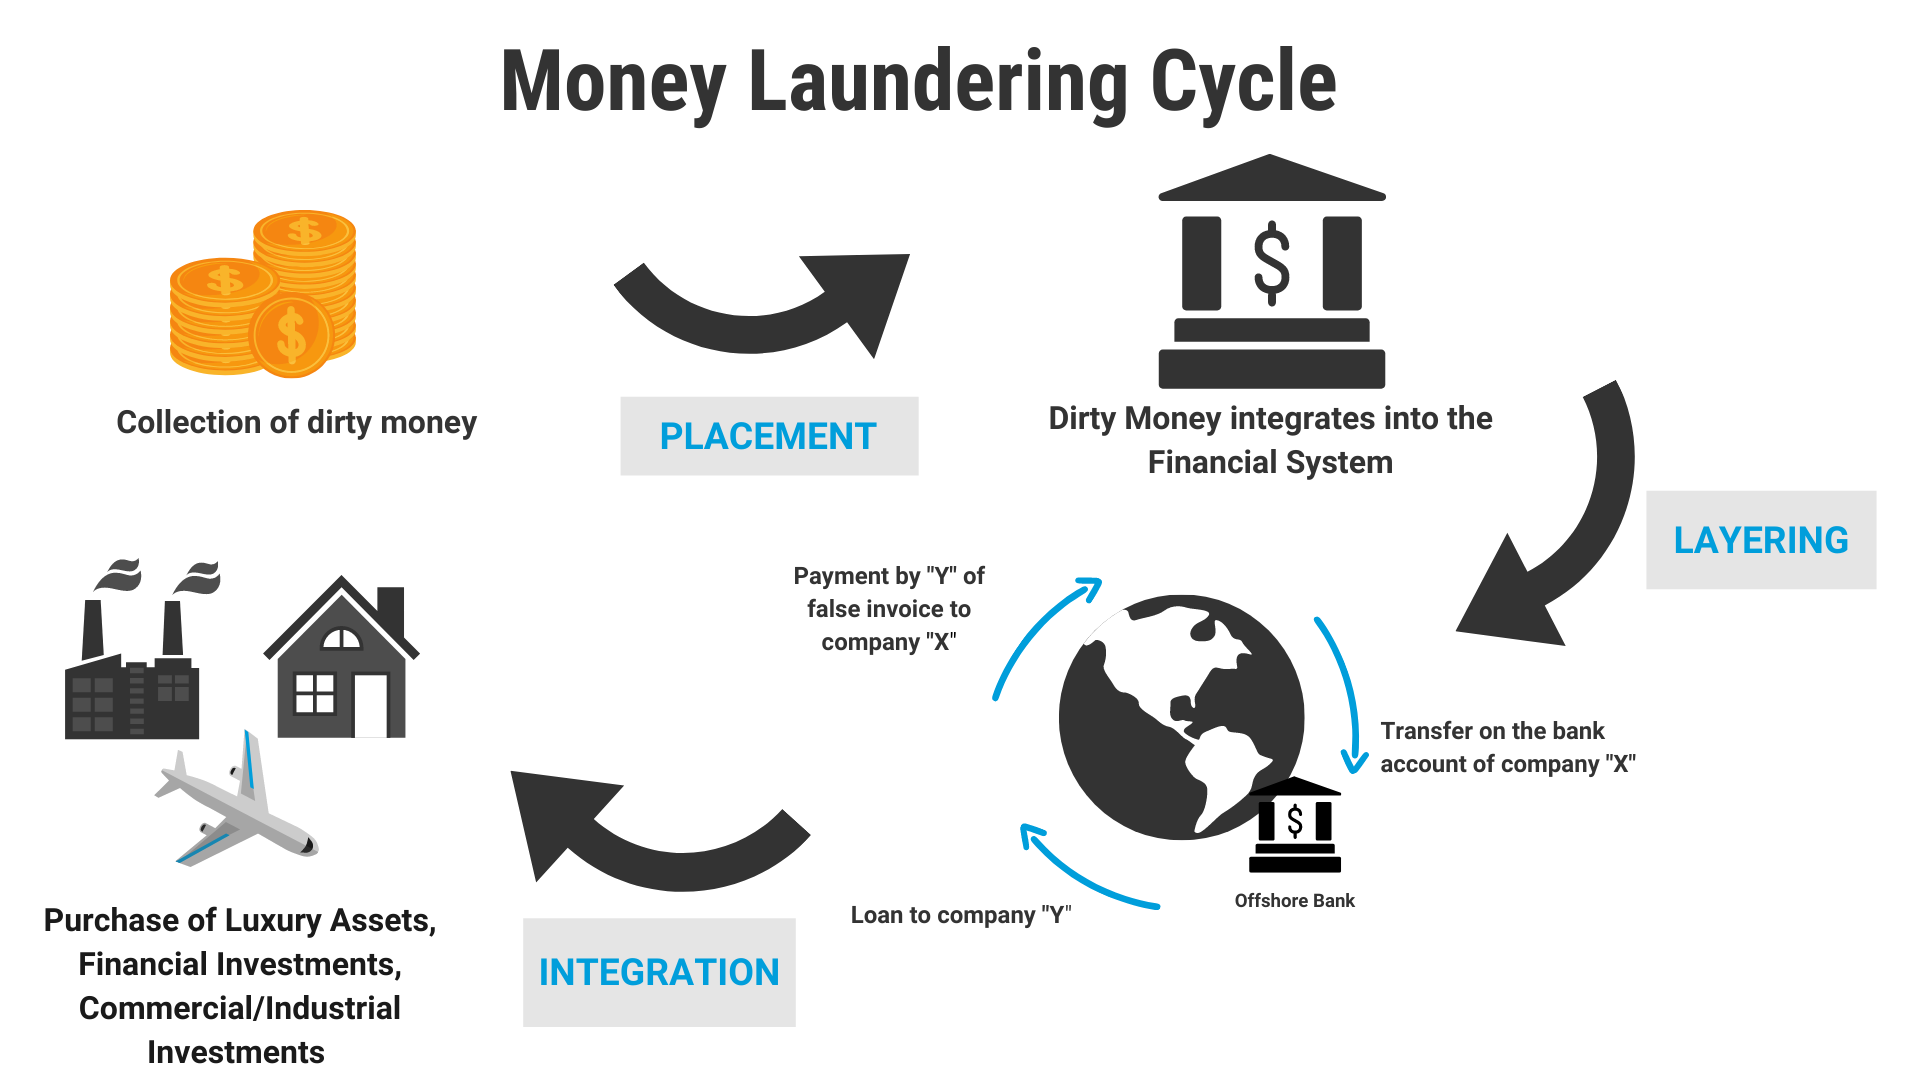 The image shows the Money Laundering Cycle 